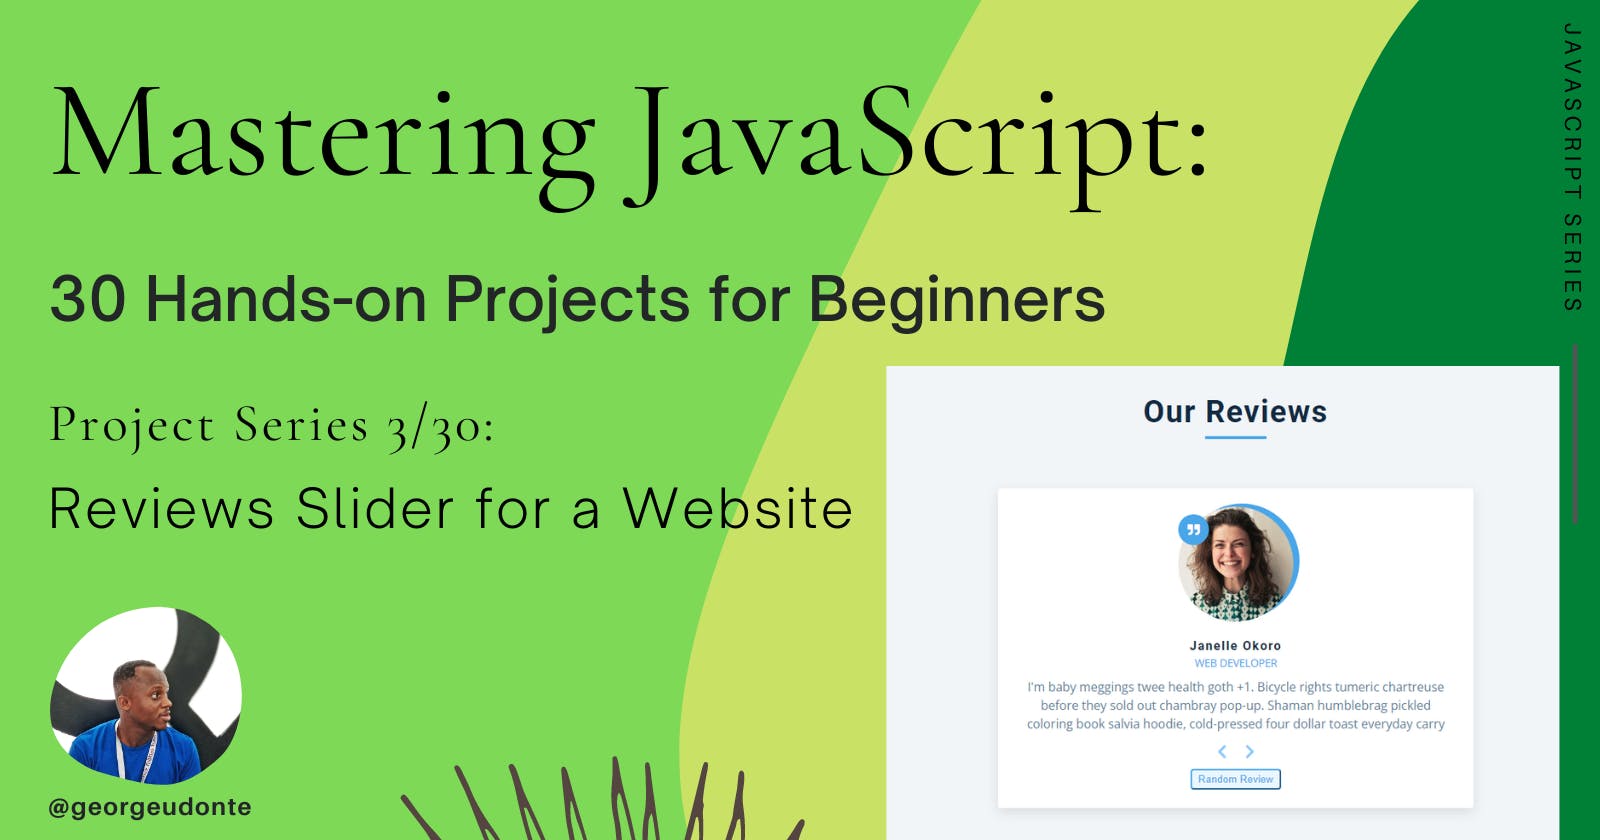 Mastering JavaScript: 30 Hands-on Projects for Beginners (Project Series 3/30)